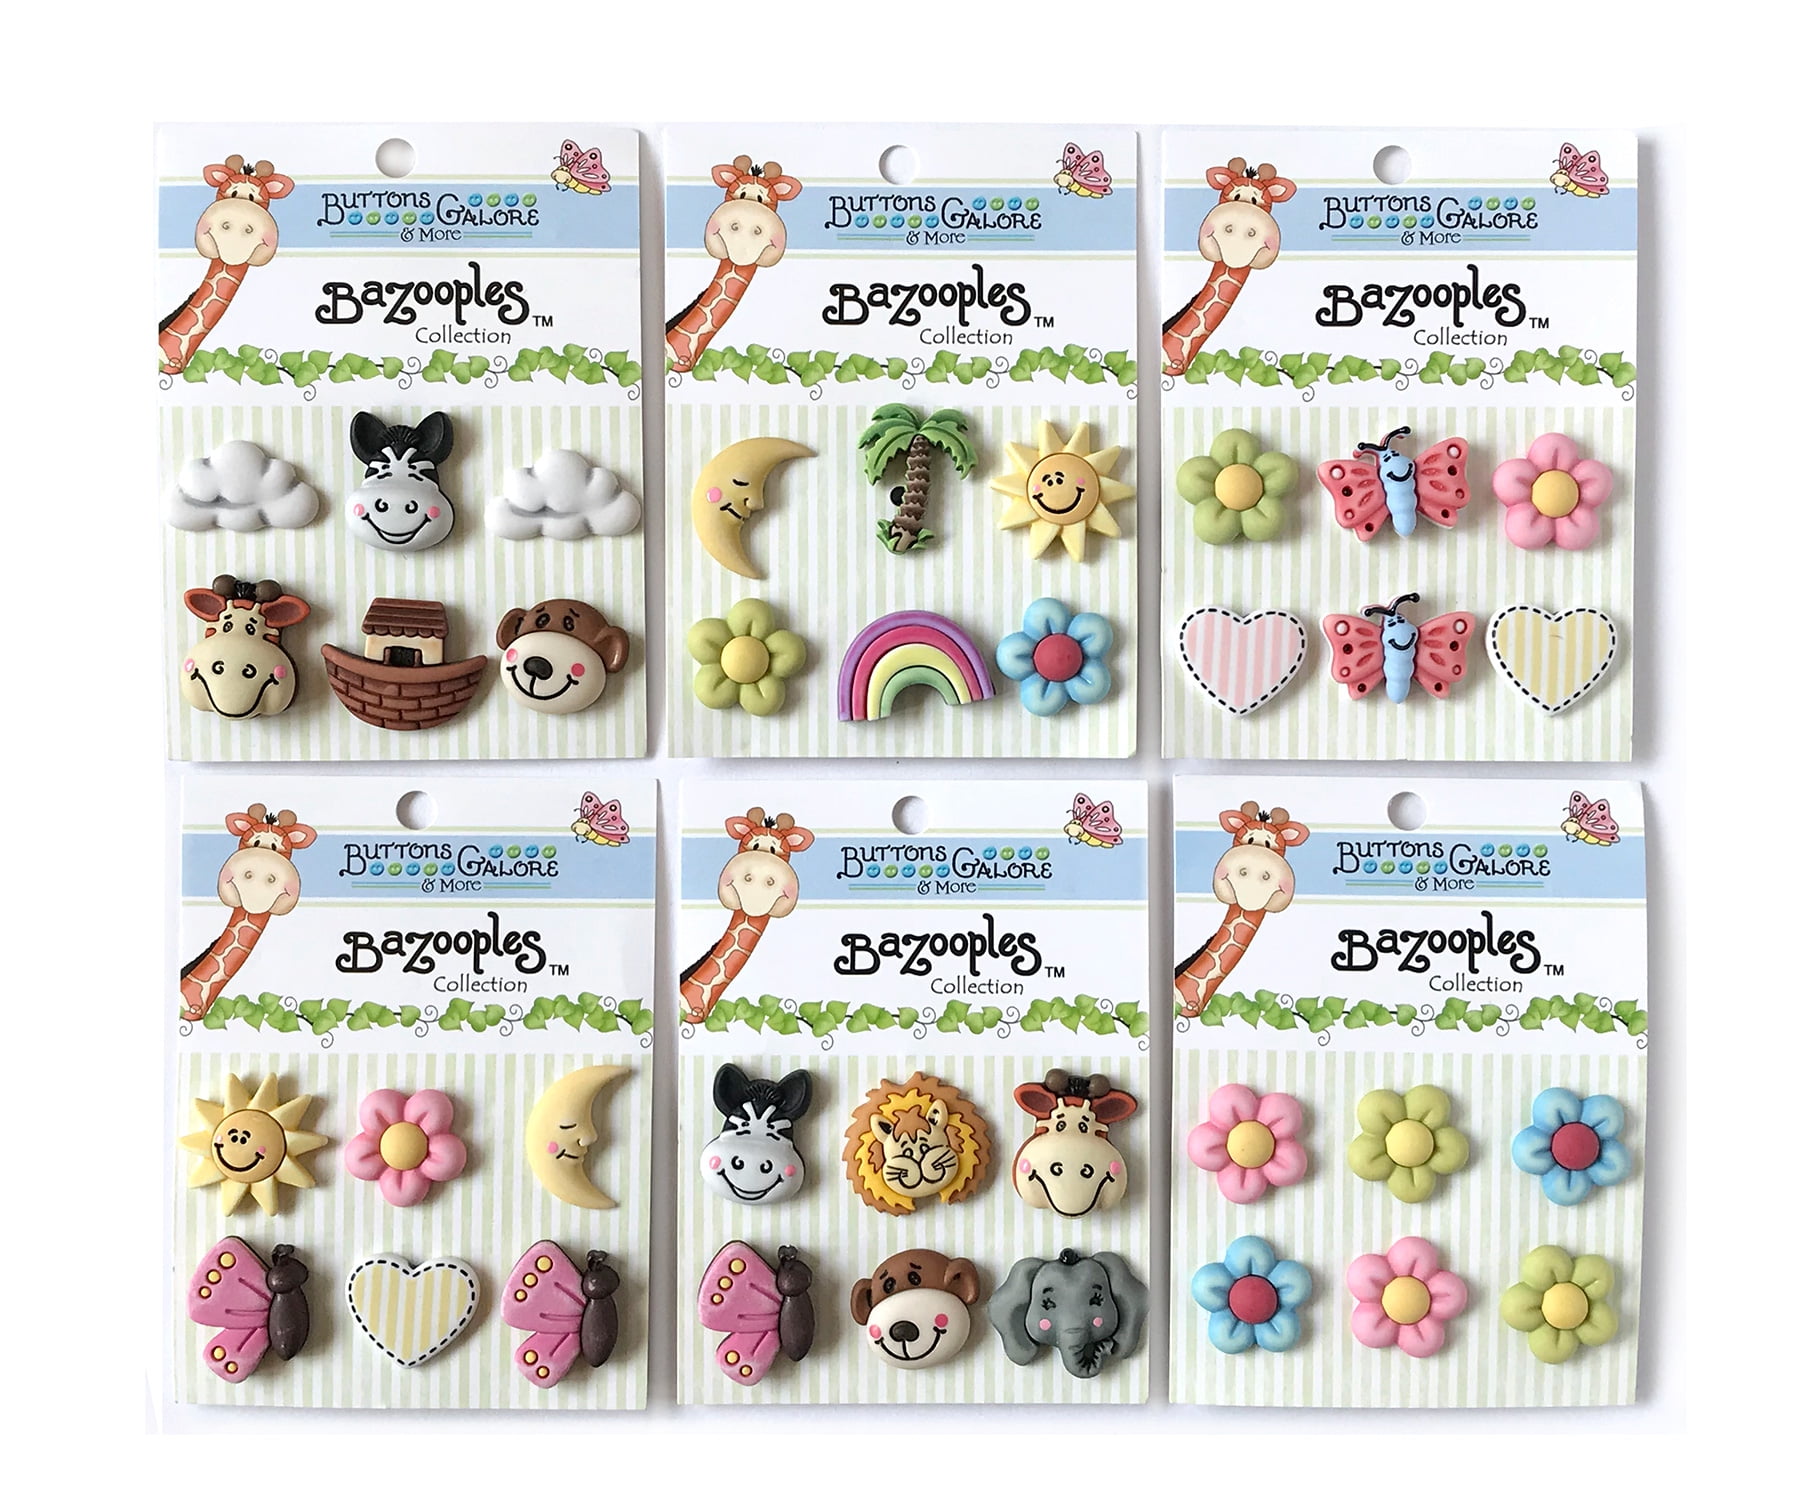 Silver tone Lady Bug Novelty Buttons Sewing Crafting Card Making Quilting 3/4"